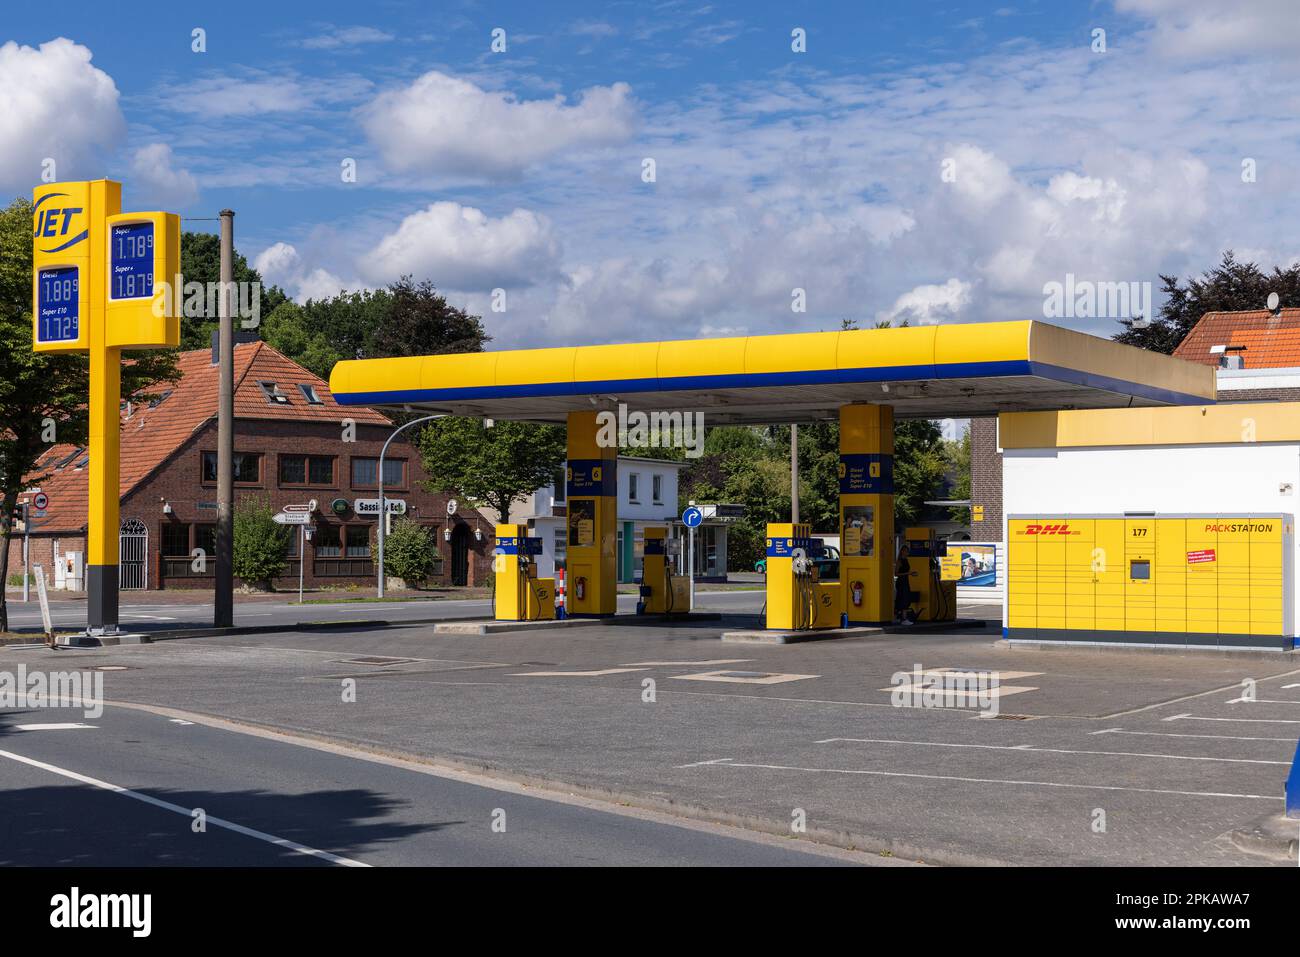 JET gas station with DHL Packstation 177, symbol image, pick up and drop off parcels around the clock, Wilhelmshaven, Lower Saxony, Germany Stock Photo